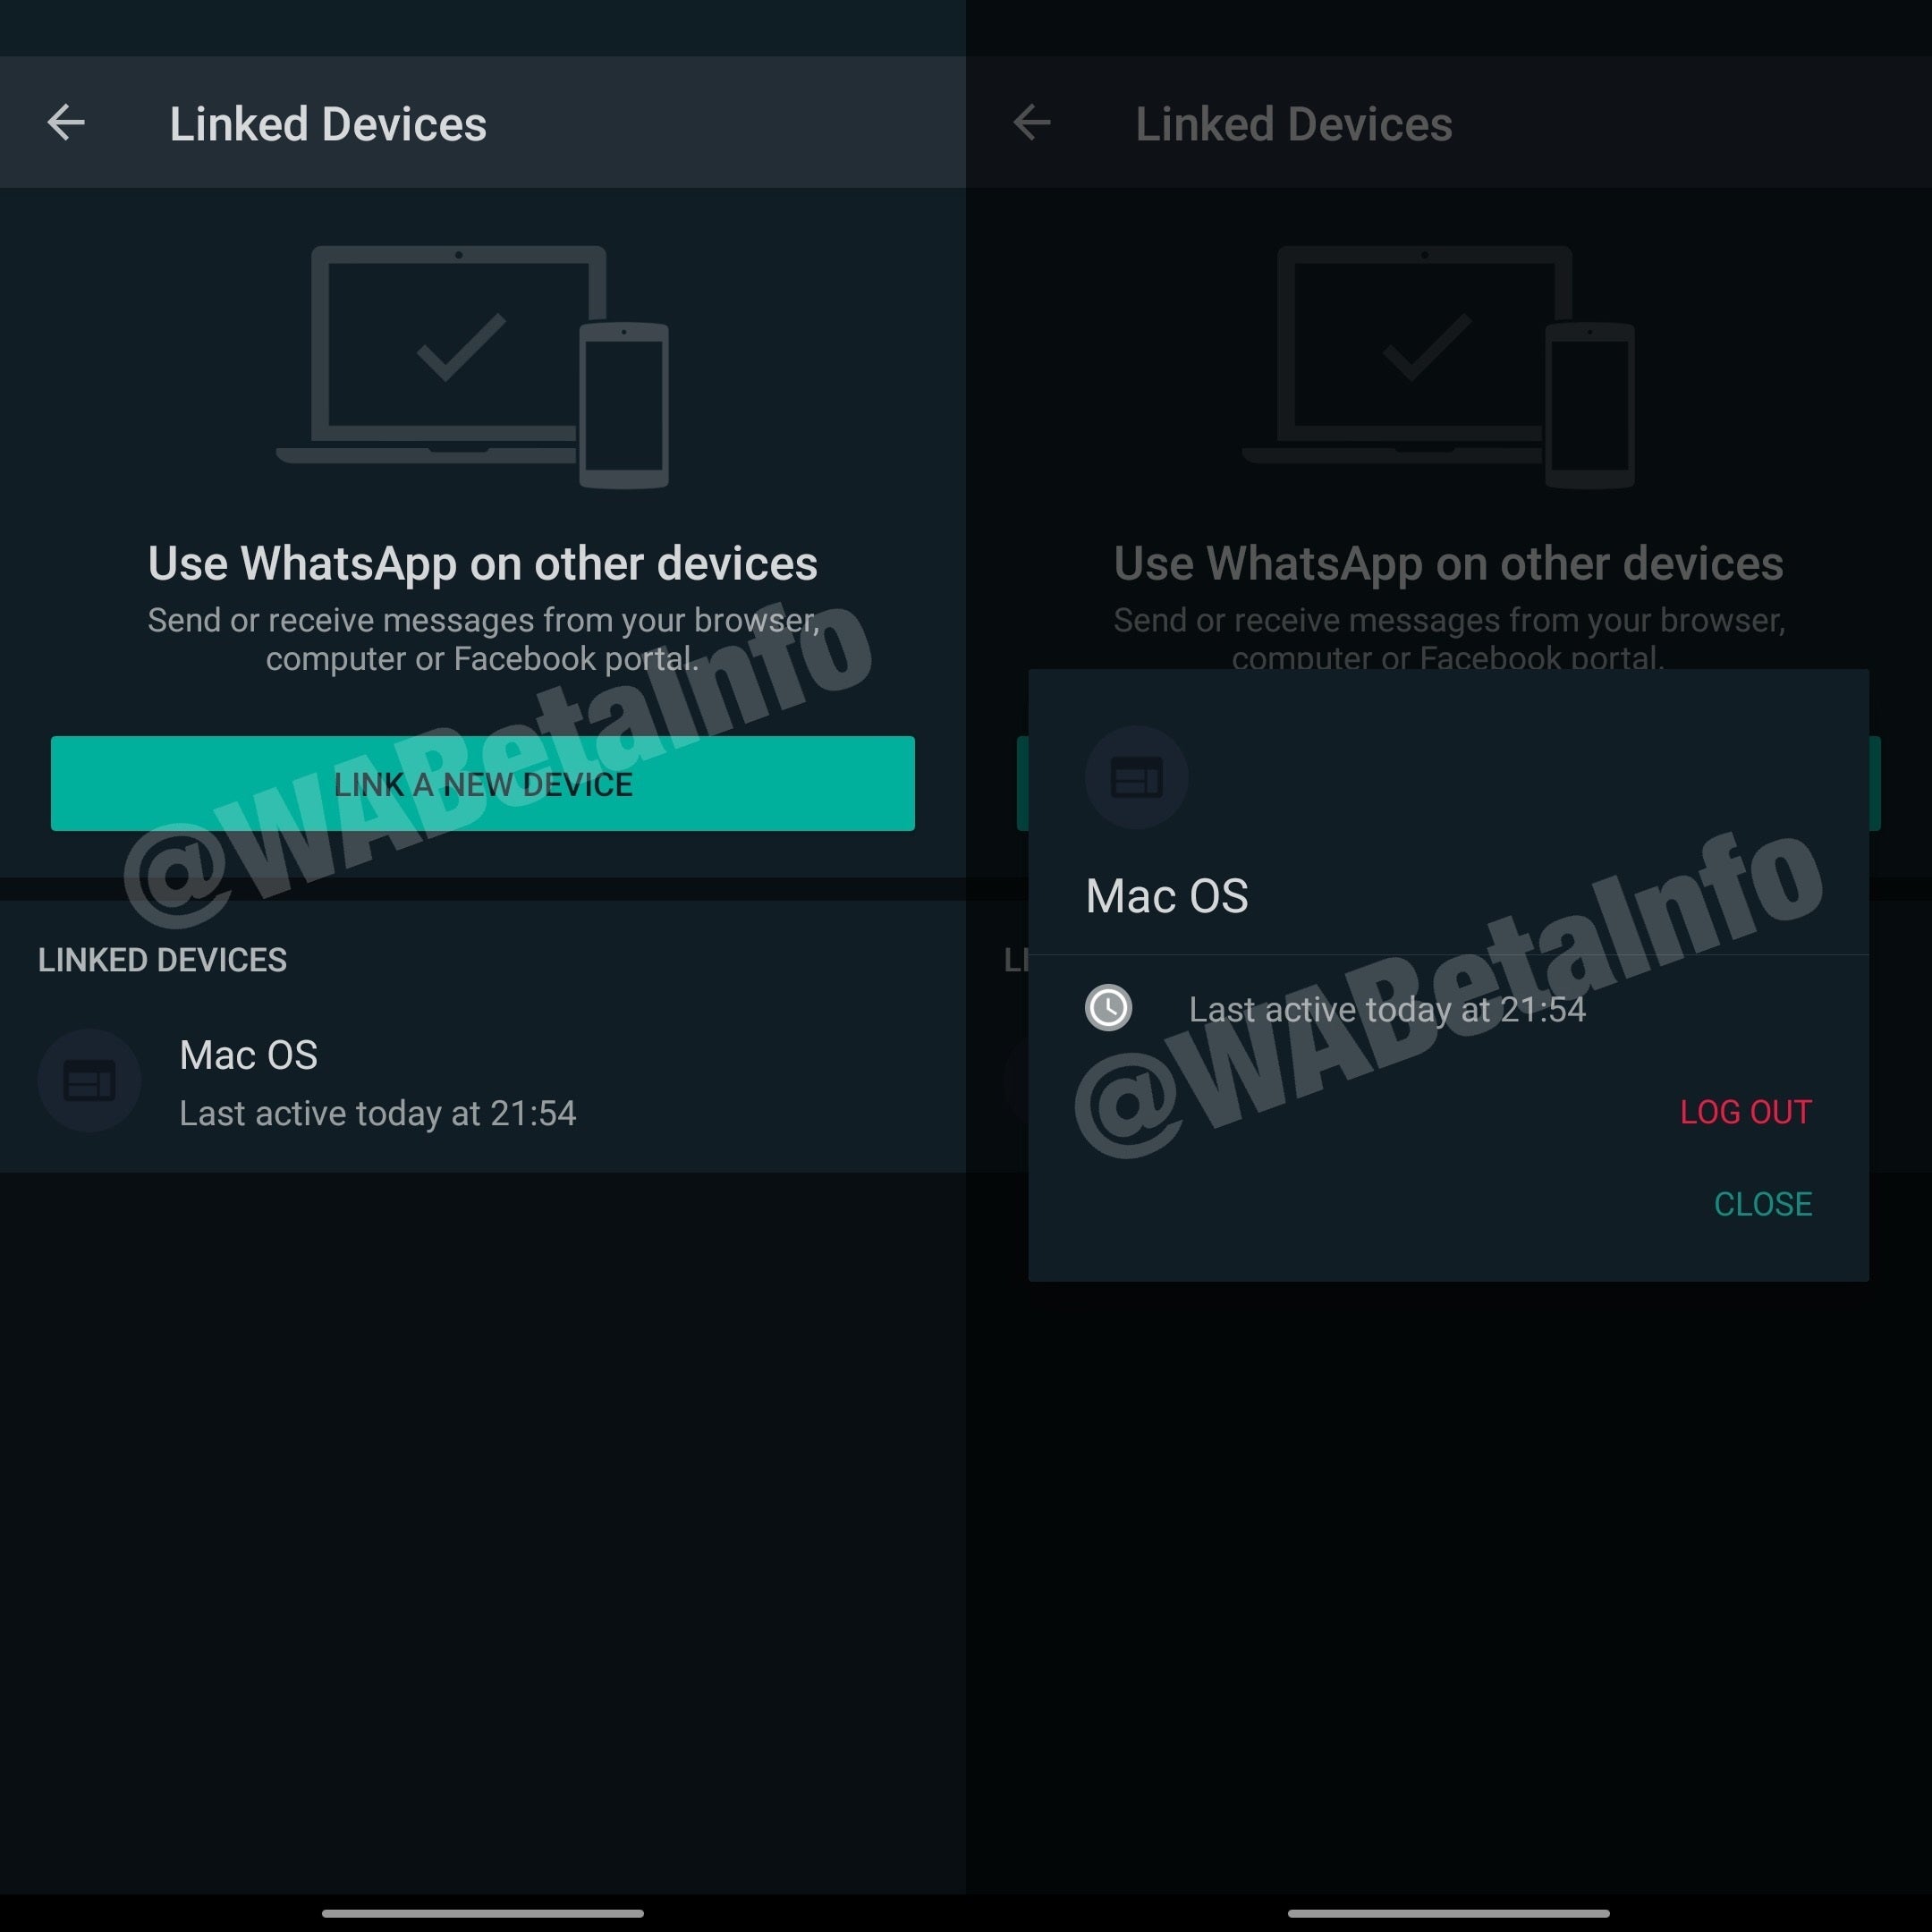 WhatsApp Linked Devices UI - WhatsApp upcoming feature lets you use the same account on multiple devices